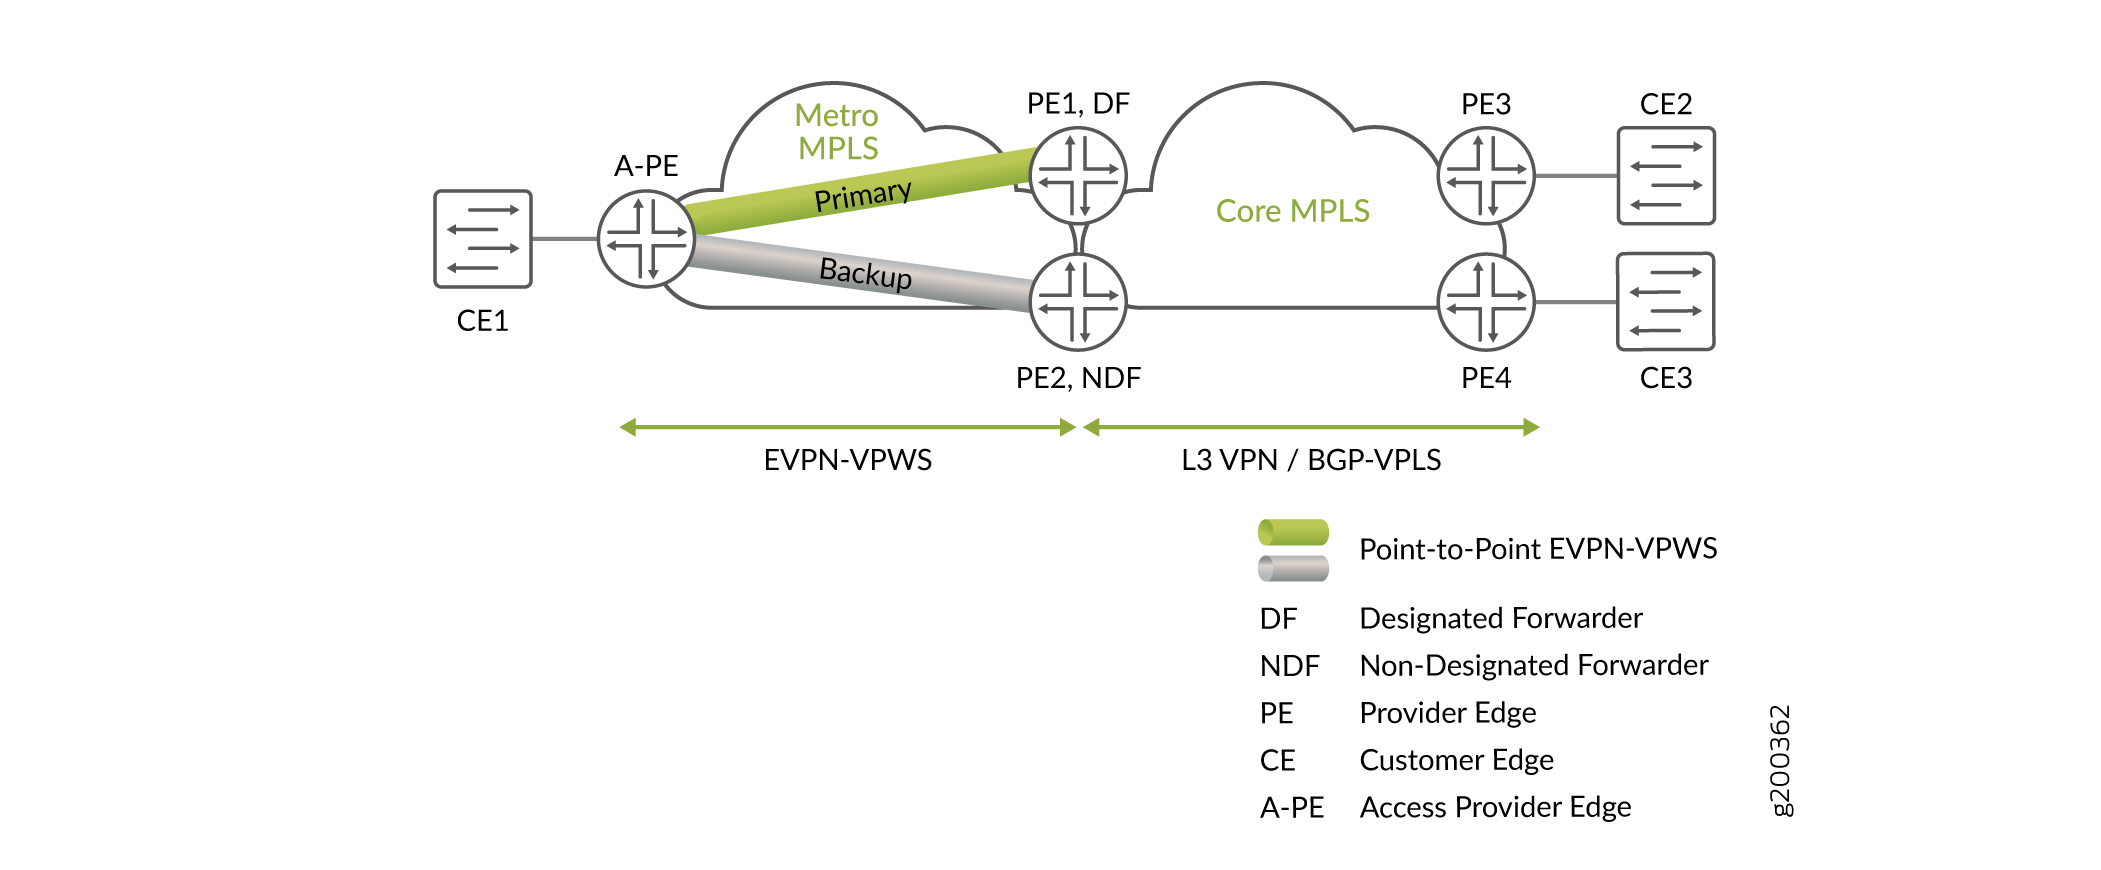 EVPN-VPWS Active/standby with Pseudowire Subscriber Interface